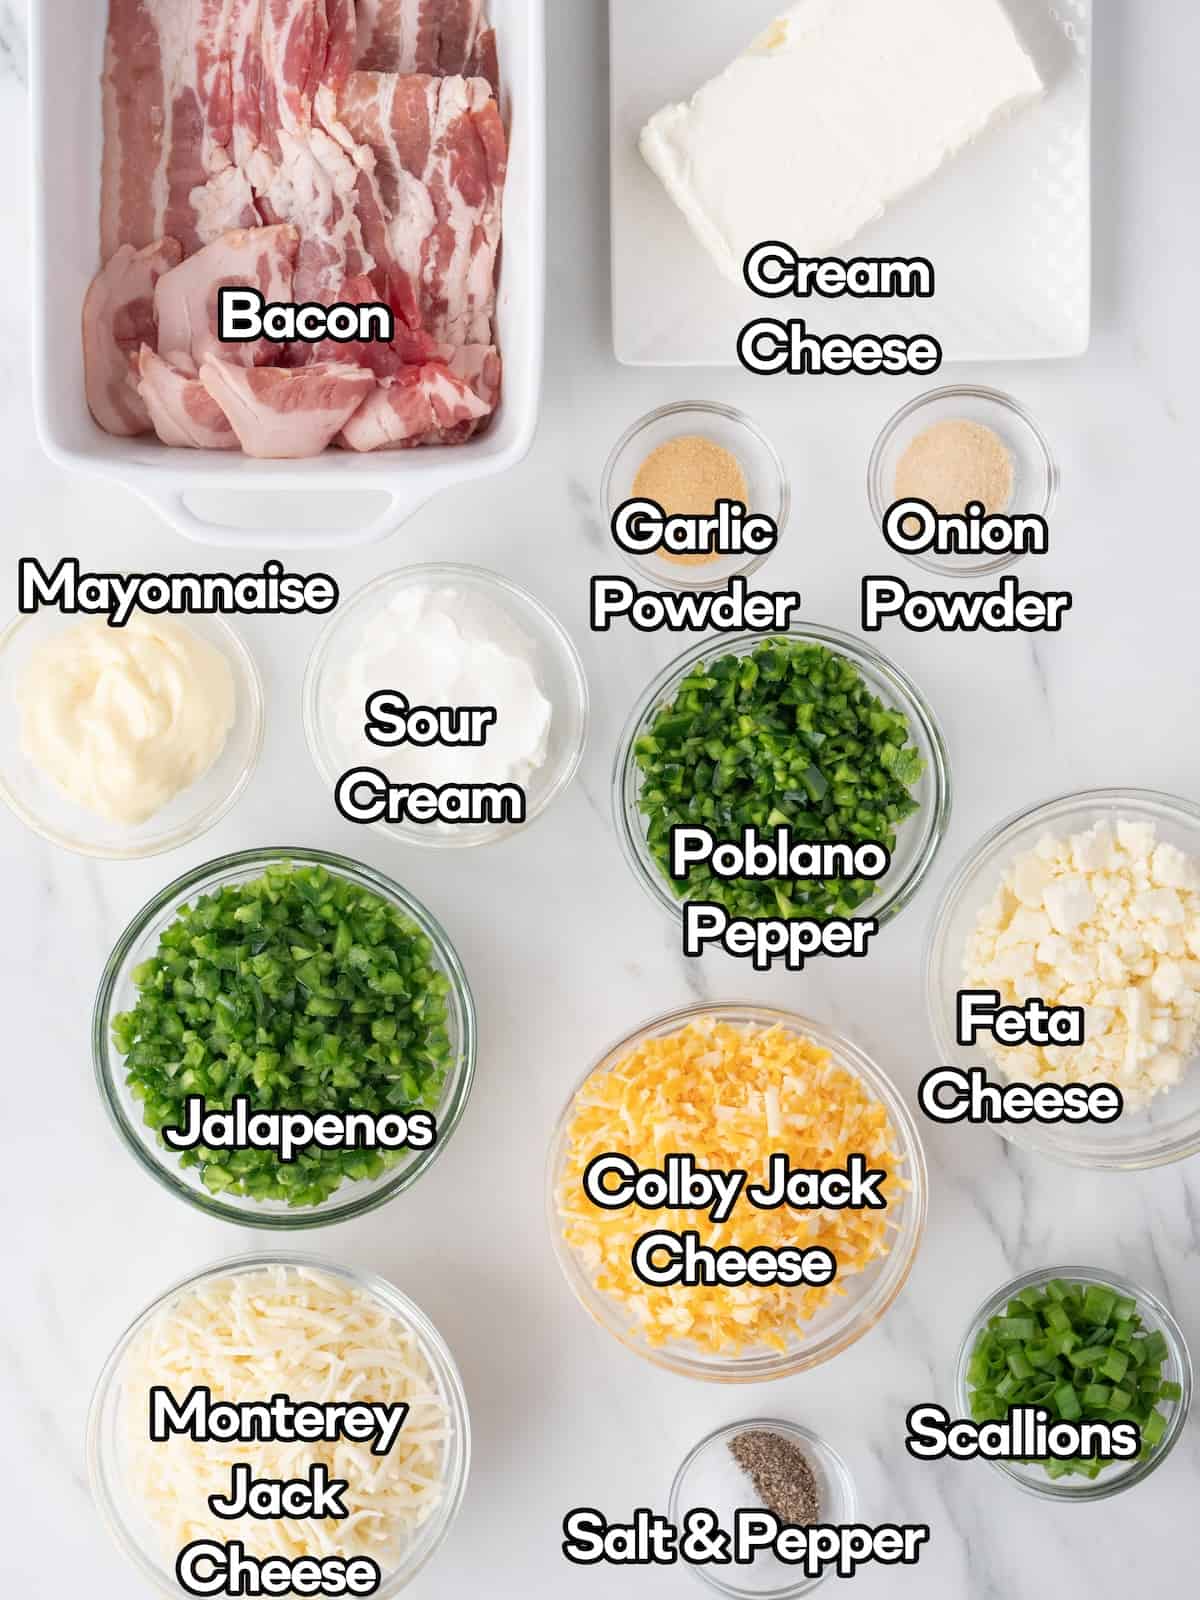 Mise-en-place of all the ingredients to make jalapeno popper dip.